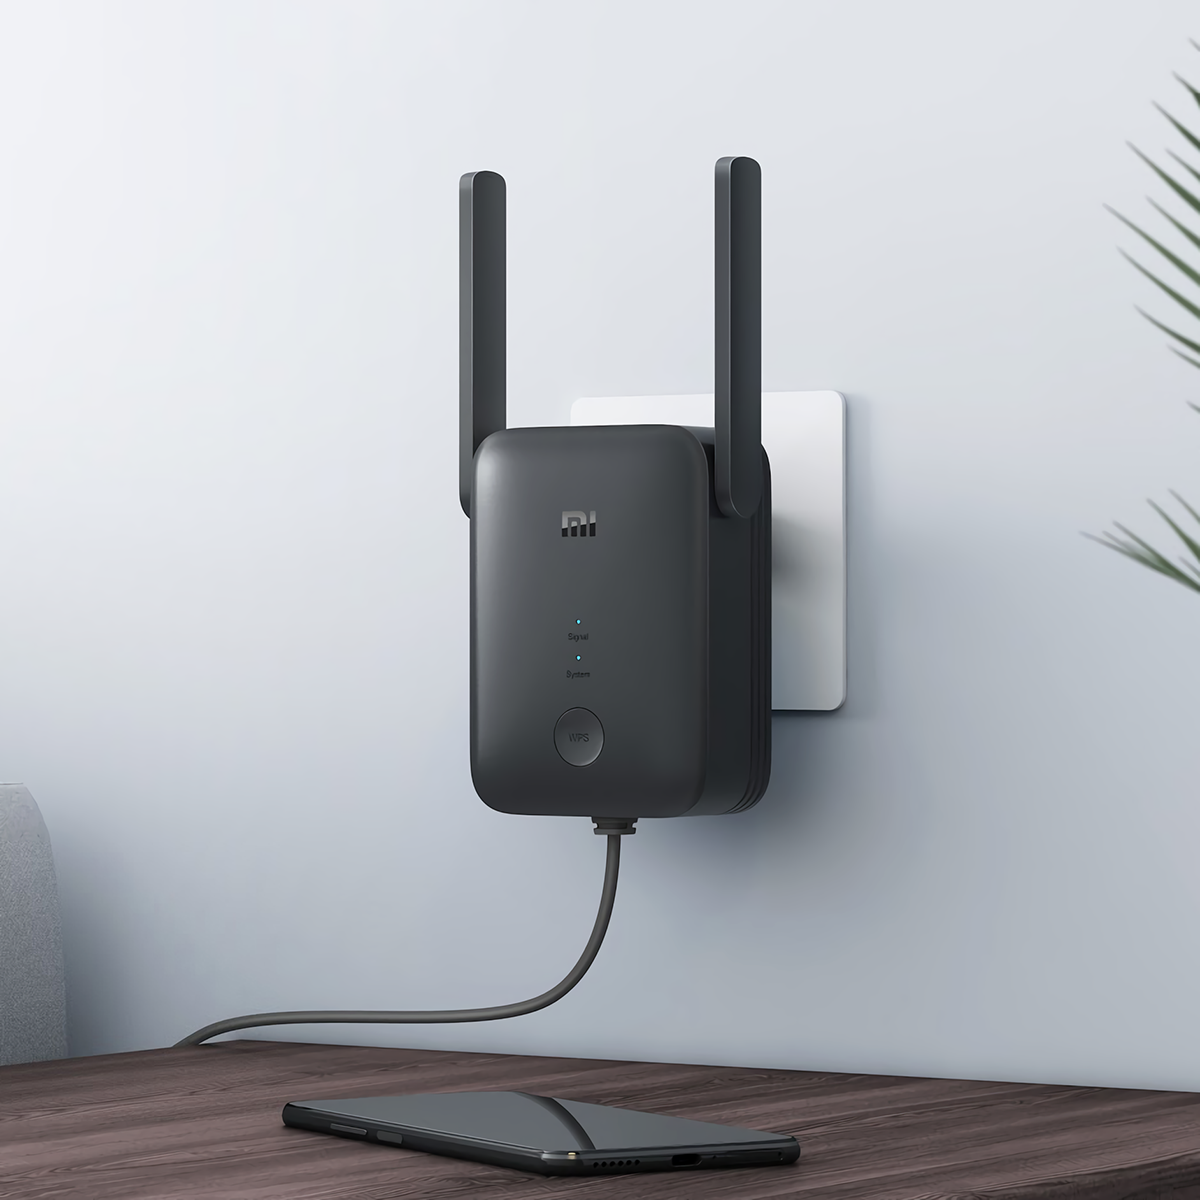 Find 2Pcs Xiaomi Mi RA75 AC1200 WiFi Range Extender WiFi Booster Dual Band 5GHz Wireless Repeater Wireless AP with Ethernet Port for Sale on Gipsybee.com with cryptocurrencies